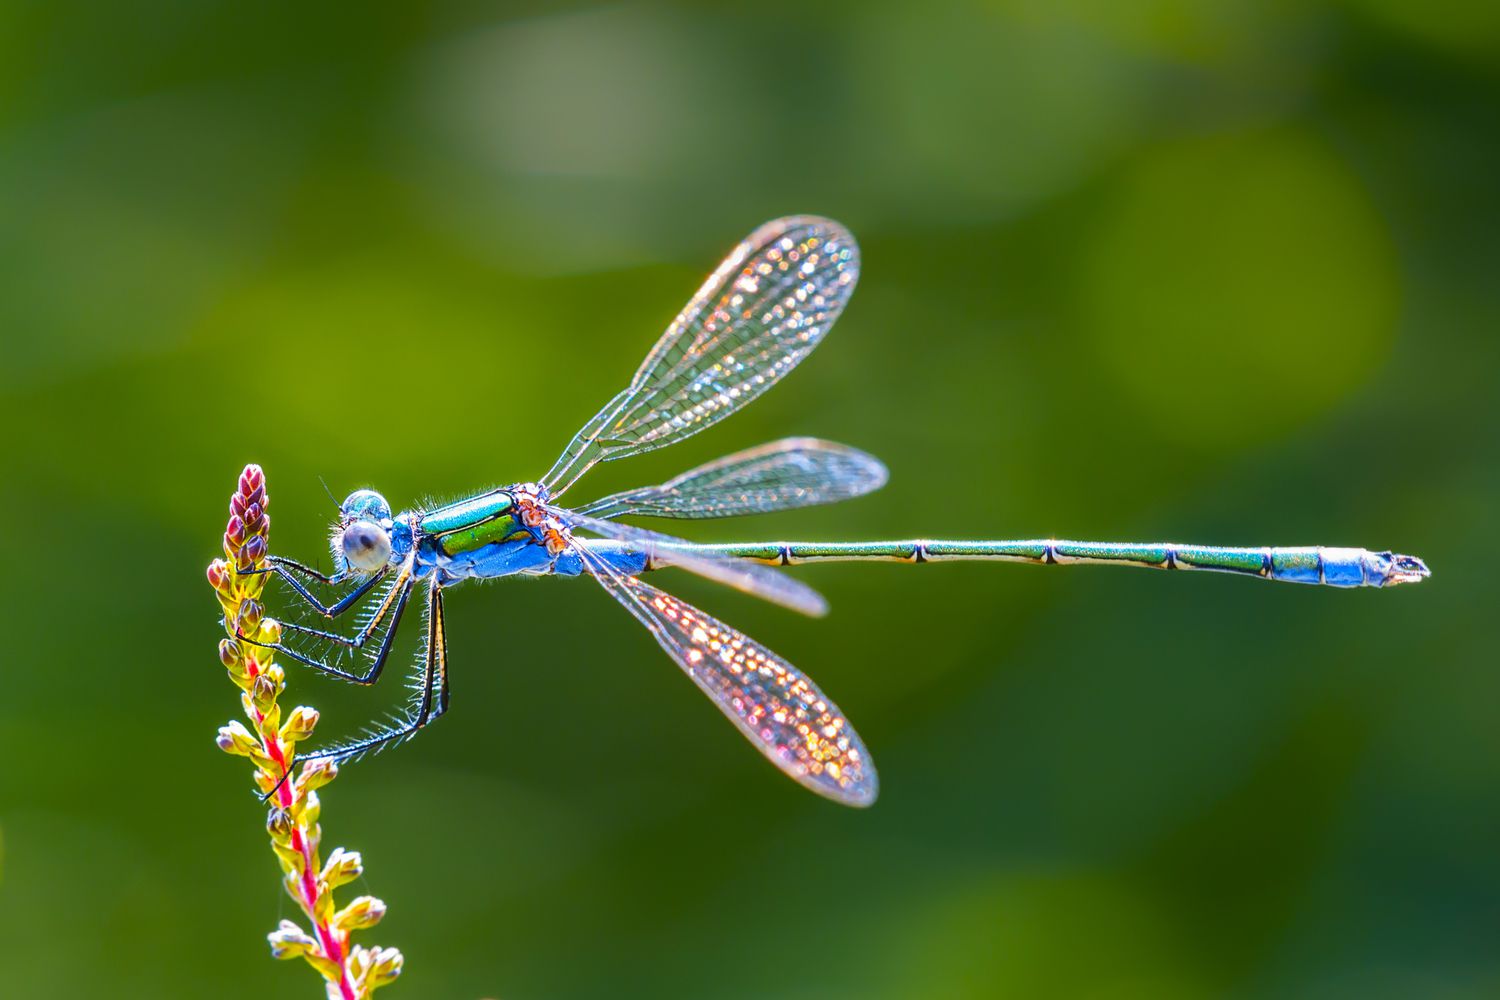 What Order Of Insects Is Dragonflies?